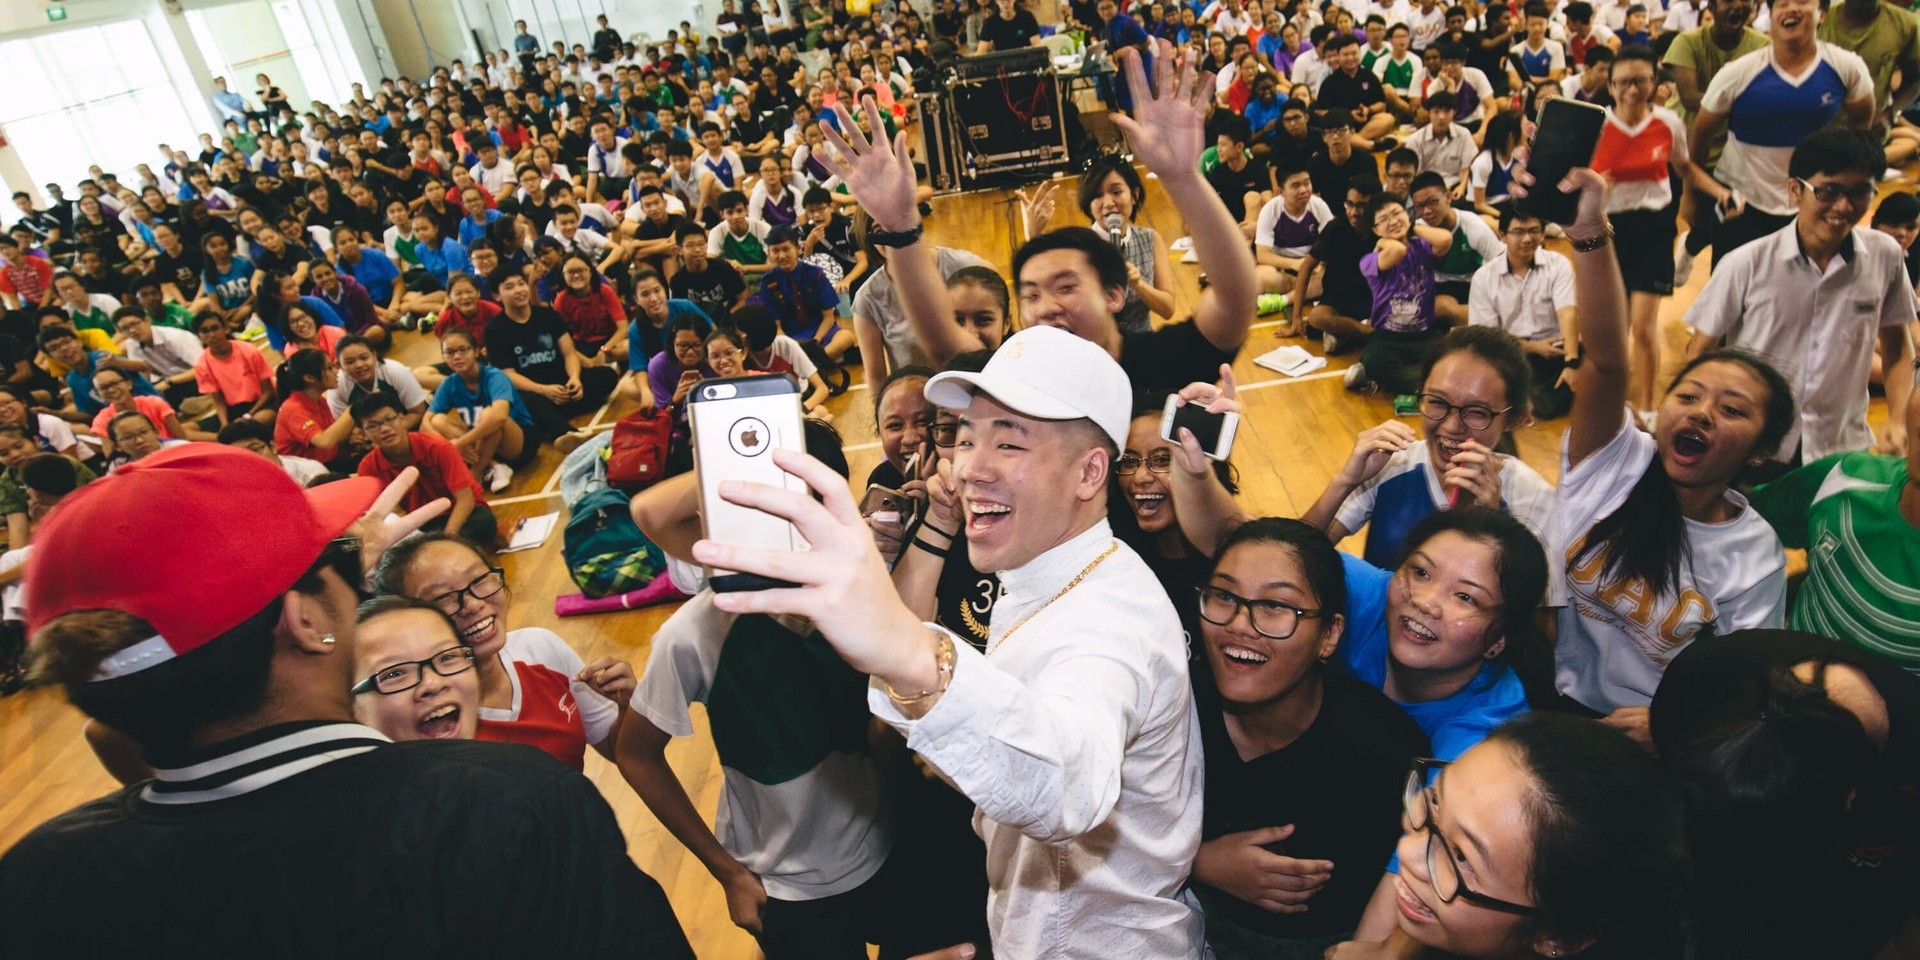 Catching up with Singapore's coolest school program, the *SCAPE Invasion Tour 2016